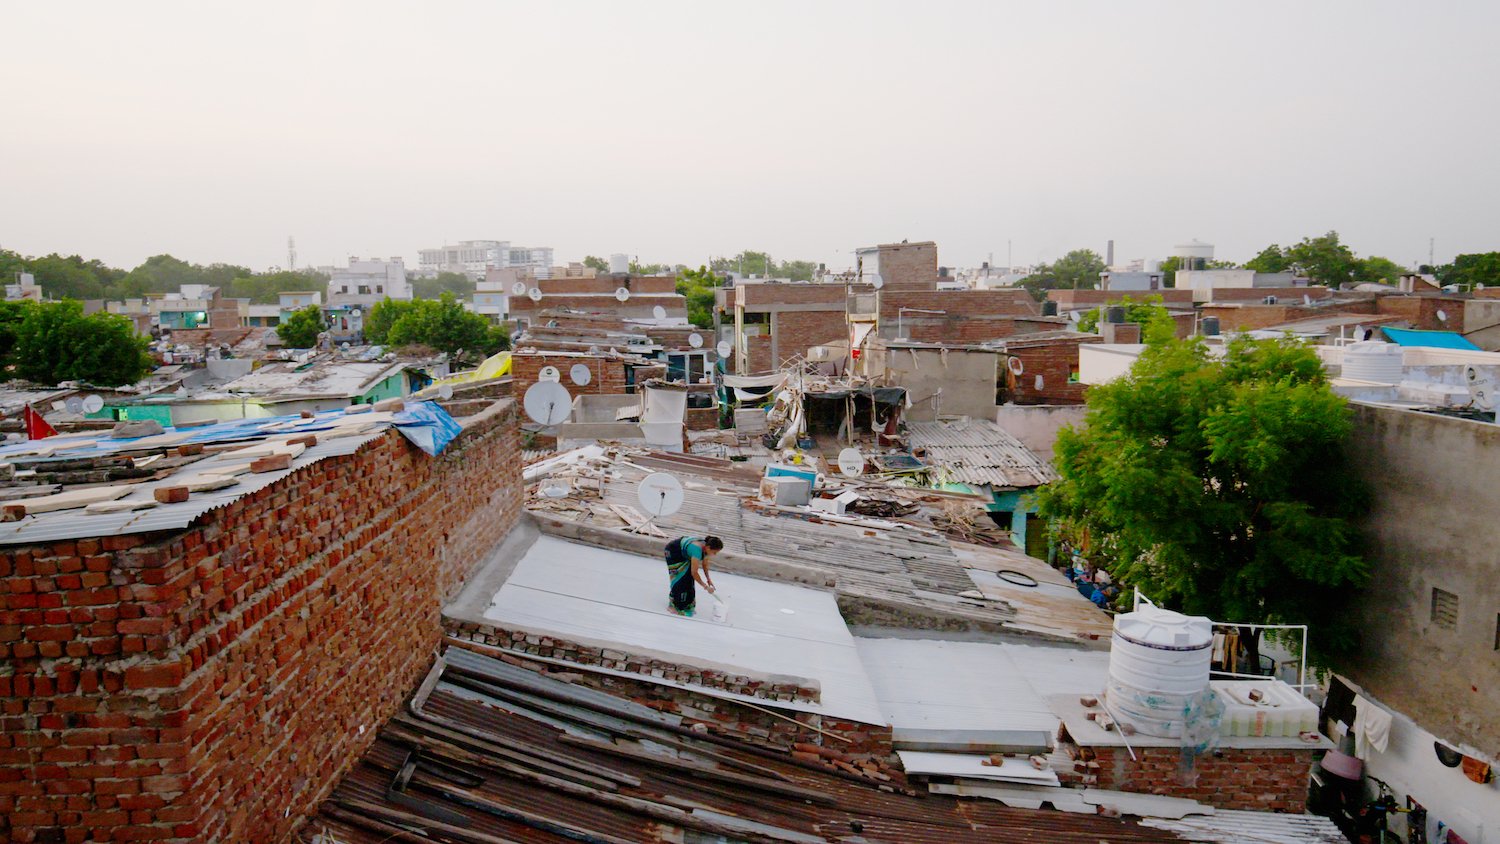 <p>Umaben Metkal paints the roof of her home in Saraspur, Ahmedabad, with solar-reflective white paint. Mahila Housing Trust has helped more than 2,500 households paint their roofs, which can reduce indoor temperatures by 4-5C. (Image: Ashden)</p>